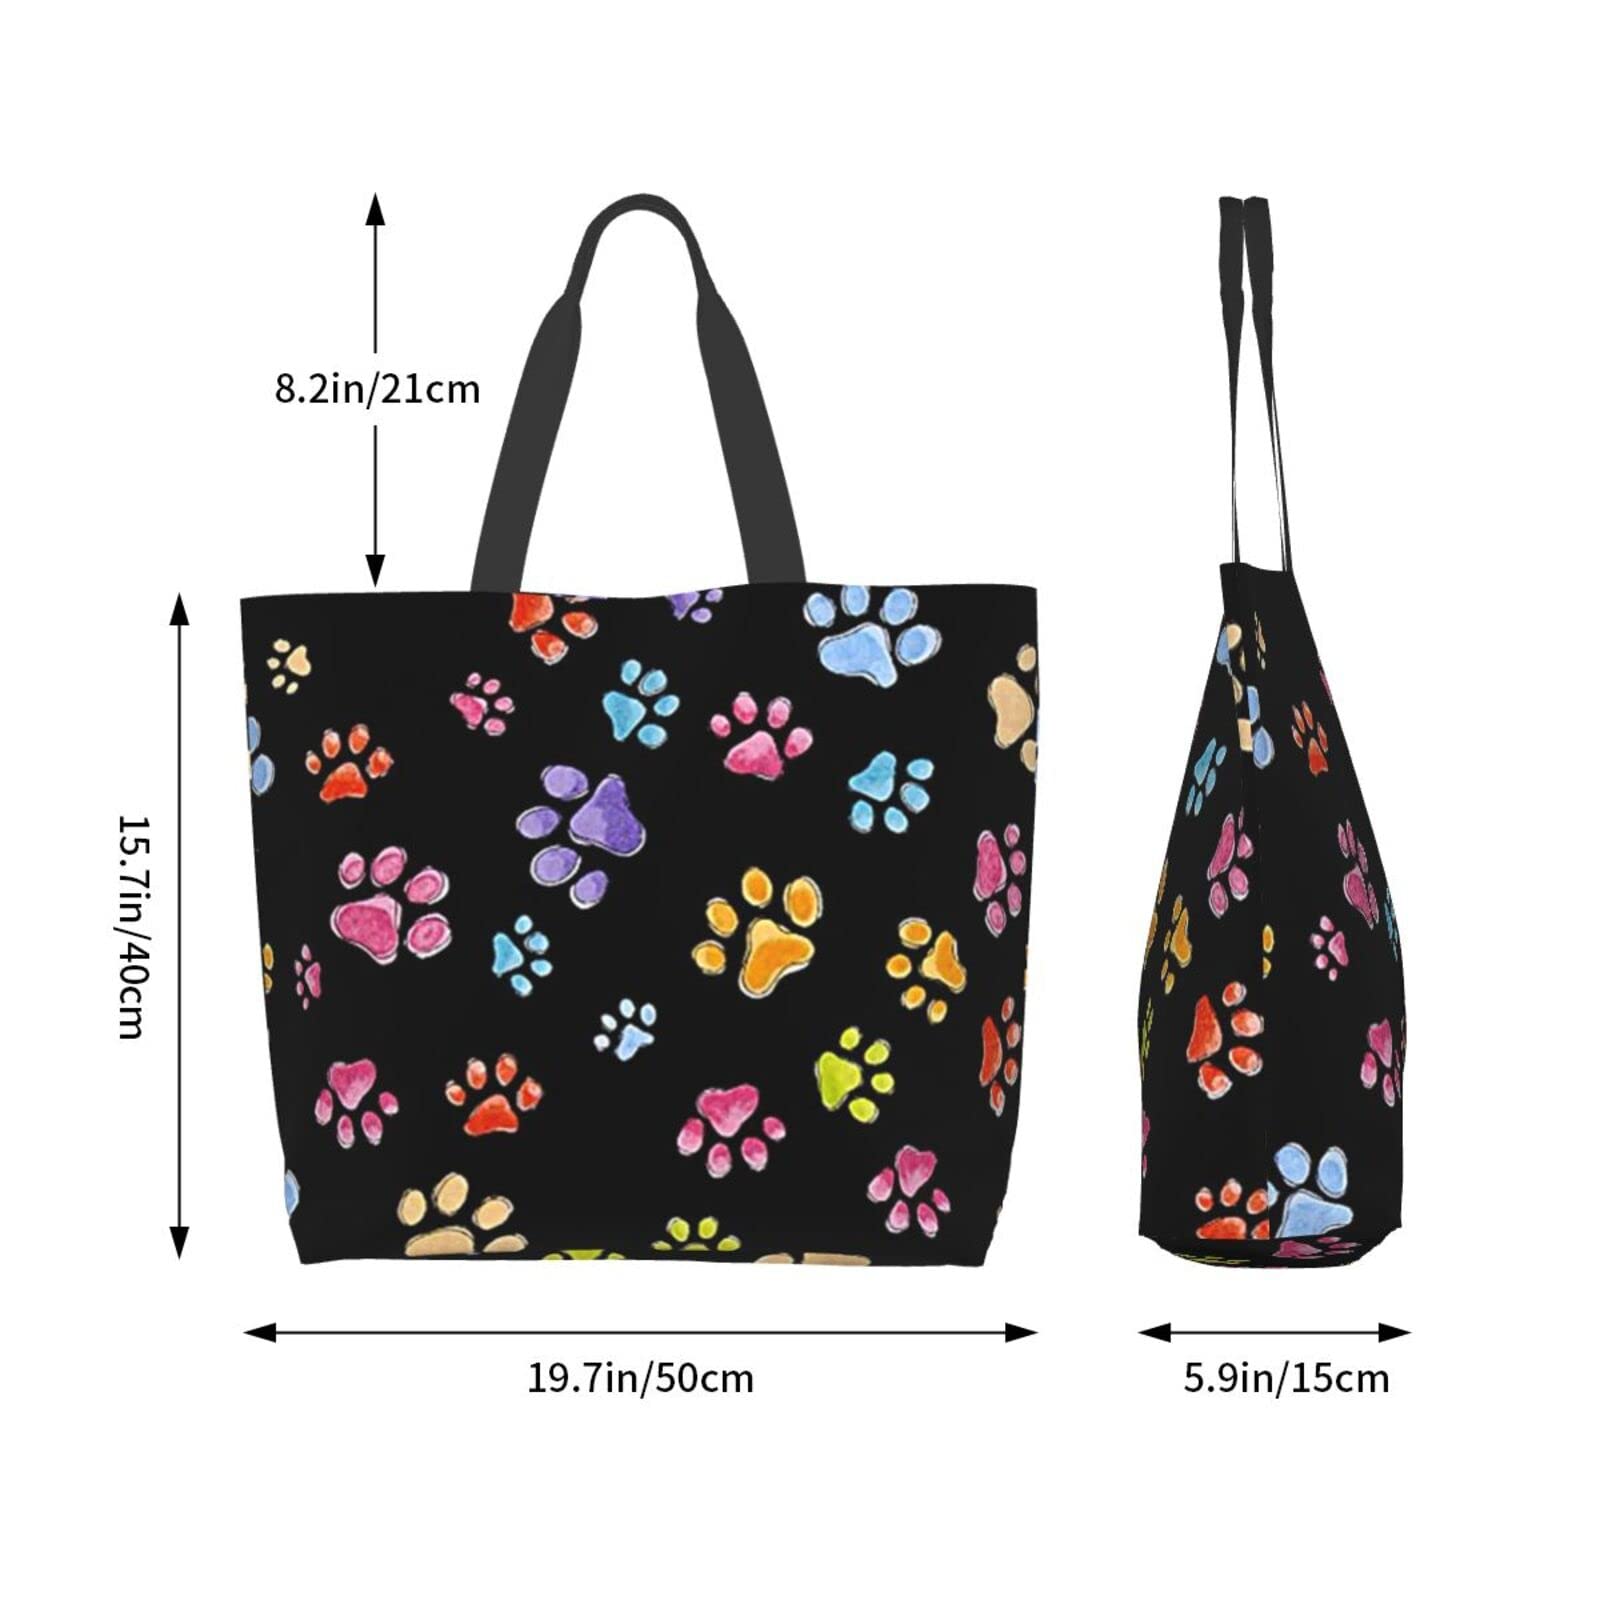 Colorful Dog Gone Pawful Paws Waterproof Tote Bag Women Large Capacity Shoulder Grocery Shopping Bags